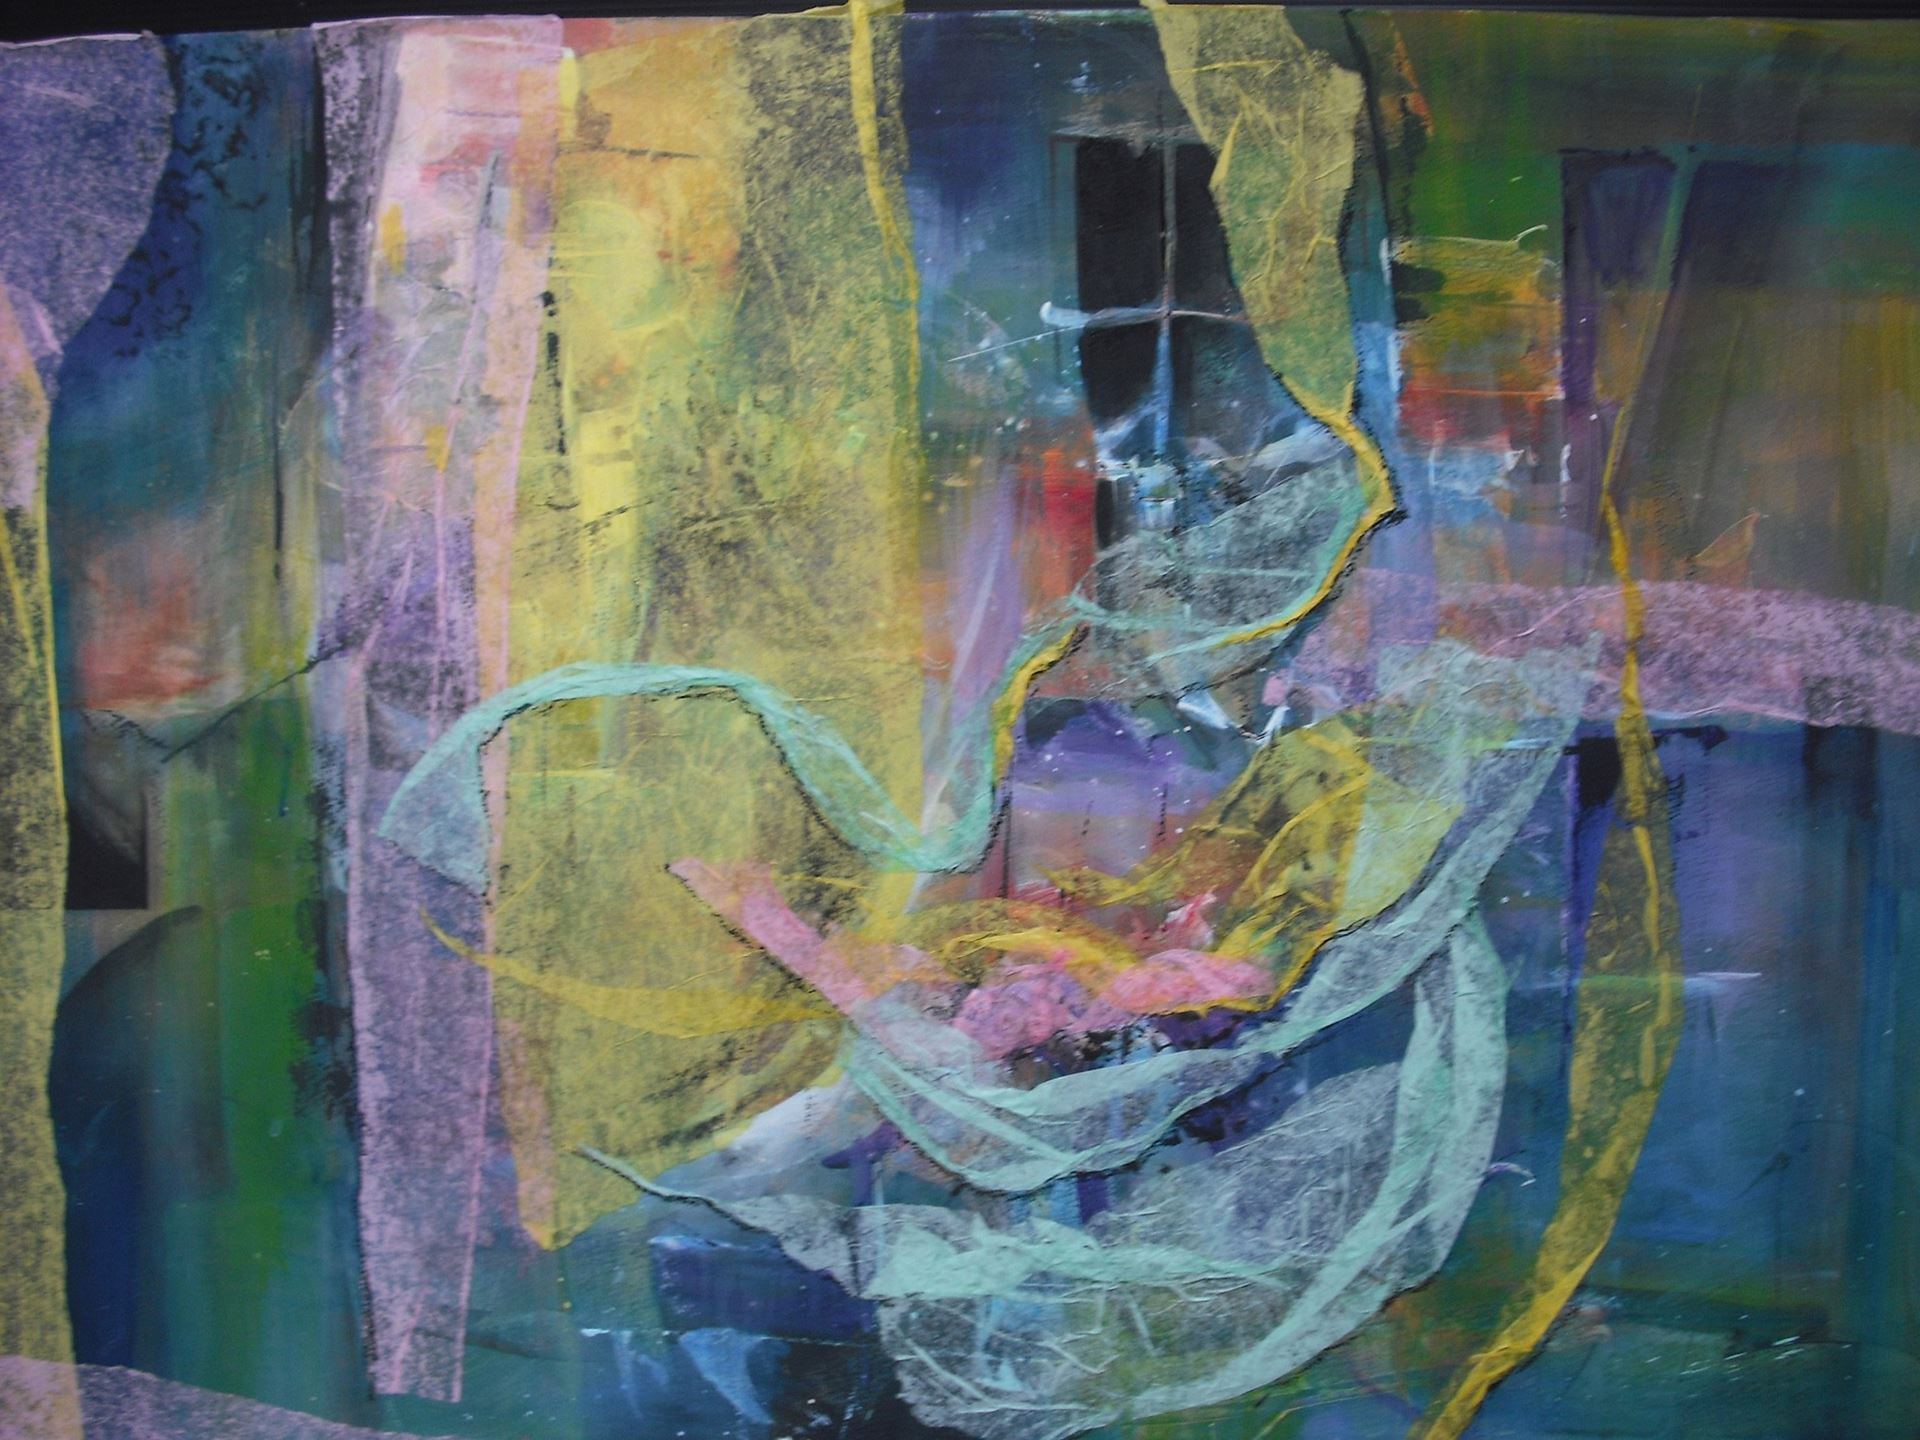 Abstract watermedia painting in cool colors with a collage sensibility